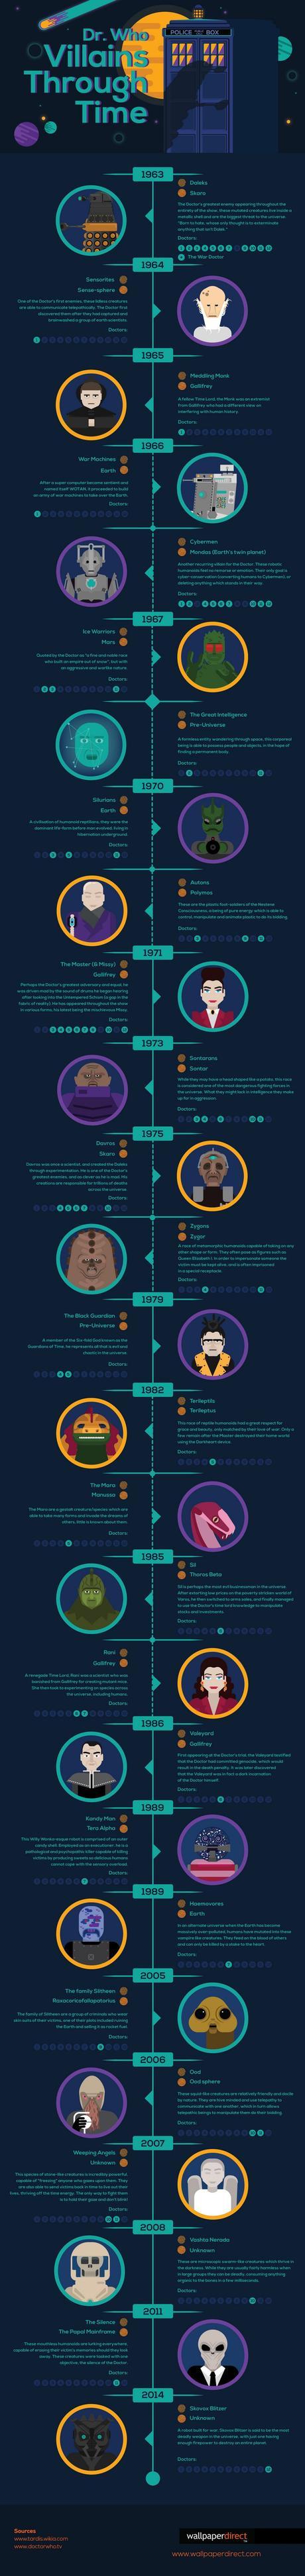 dr-who-villains-infographic